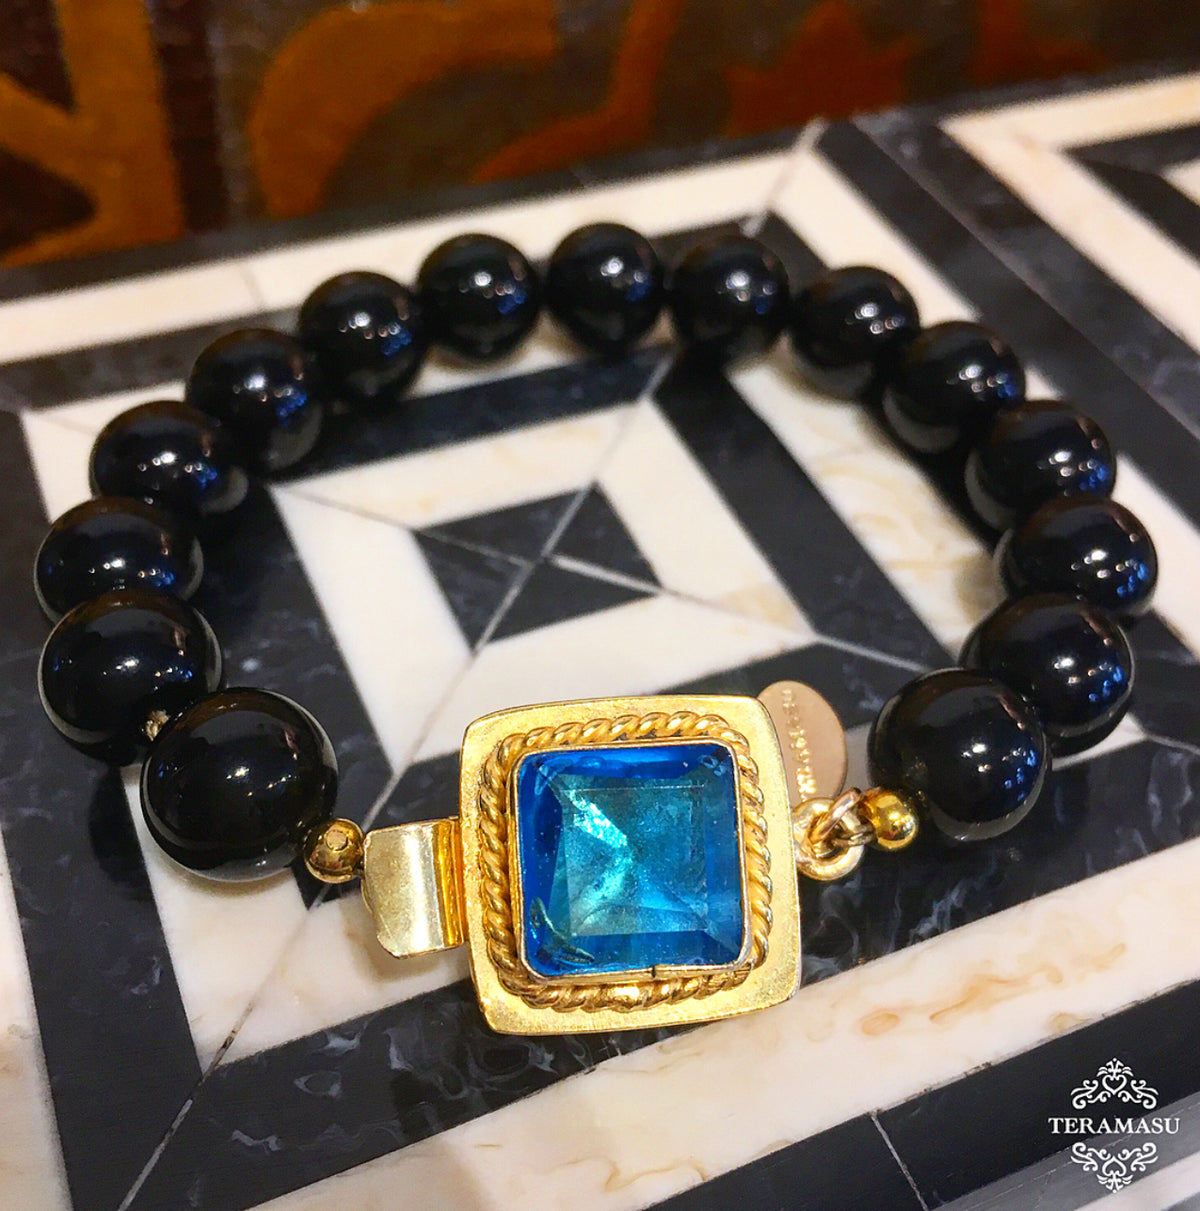 Living Ladylike: Add a Little Sparkle to Your Style with our Teramasu Black Onyx and One of a Kind Blue Crystal Stone Box Clasp Bracelet